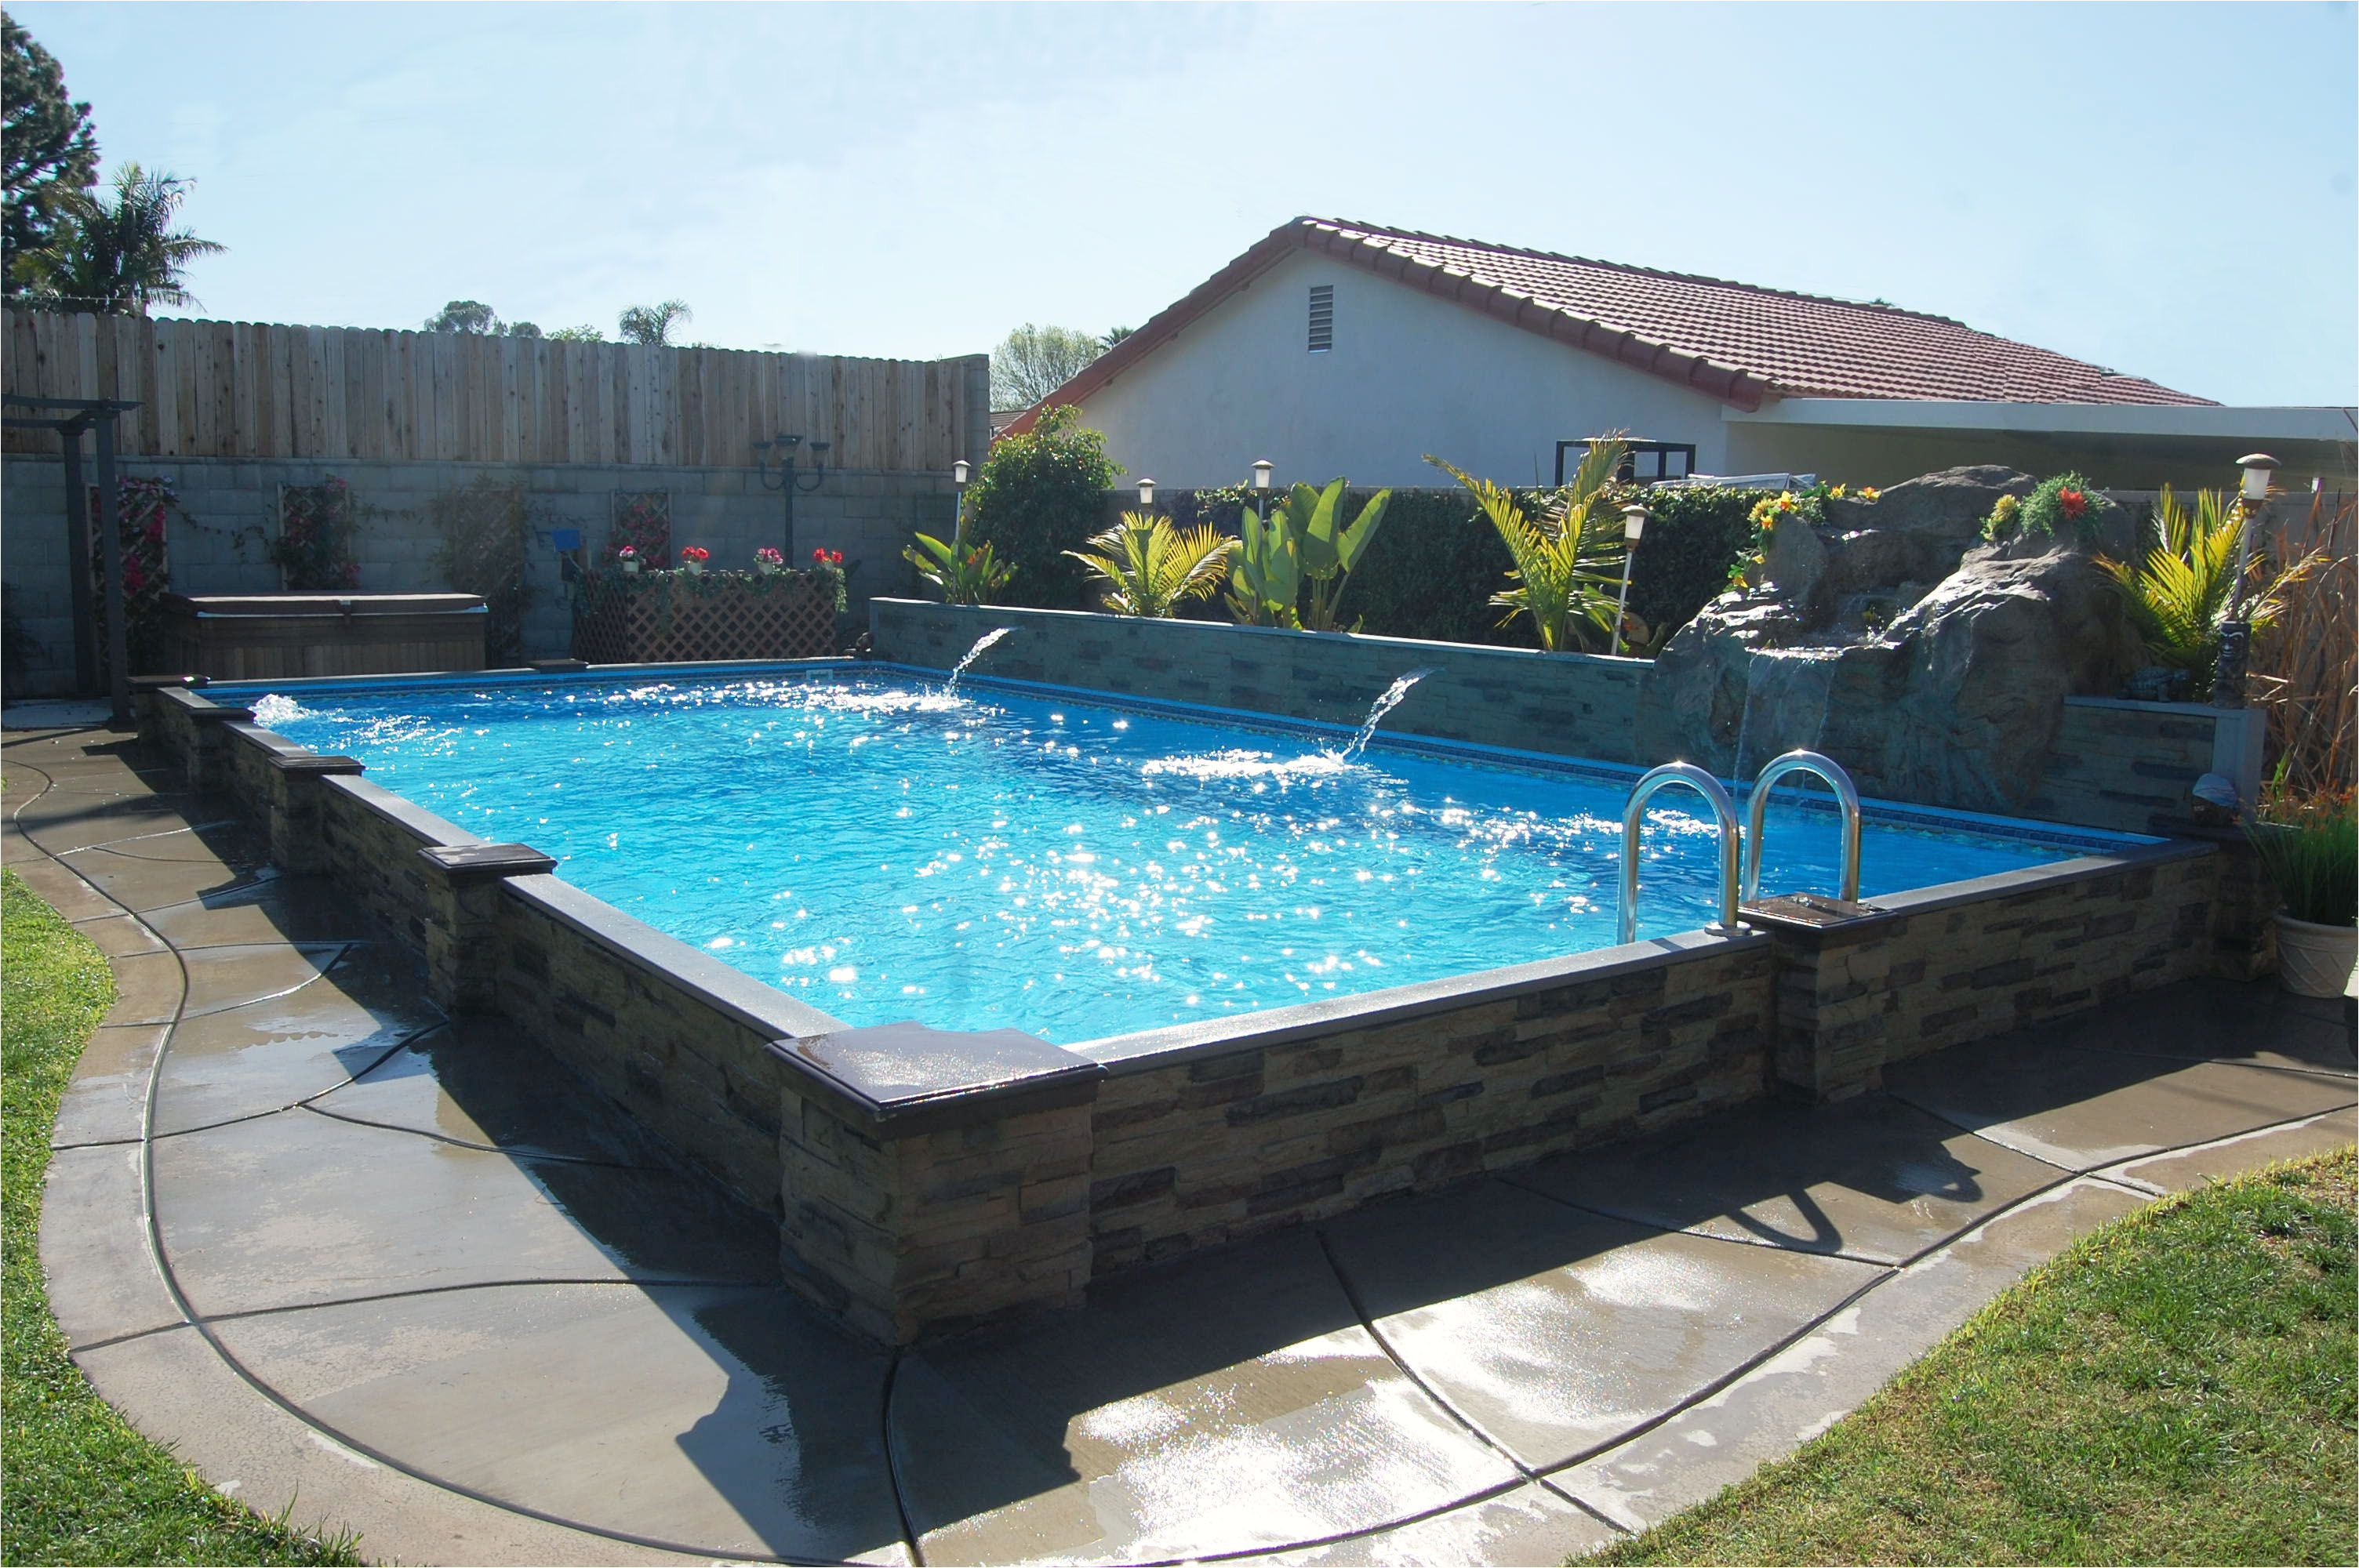 this exlusive islander pool is 14 x 28 with a rock waterfall and 2 cascades